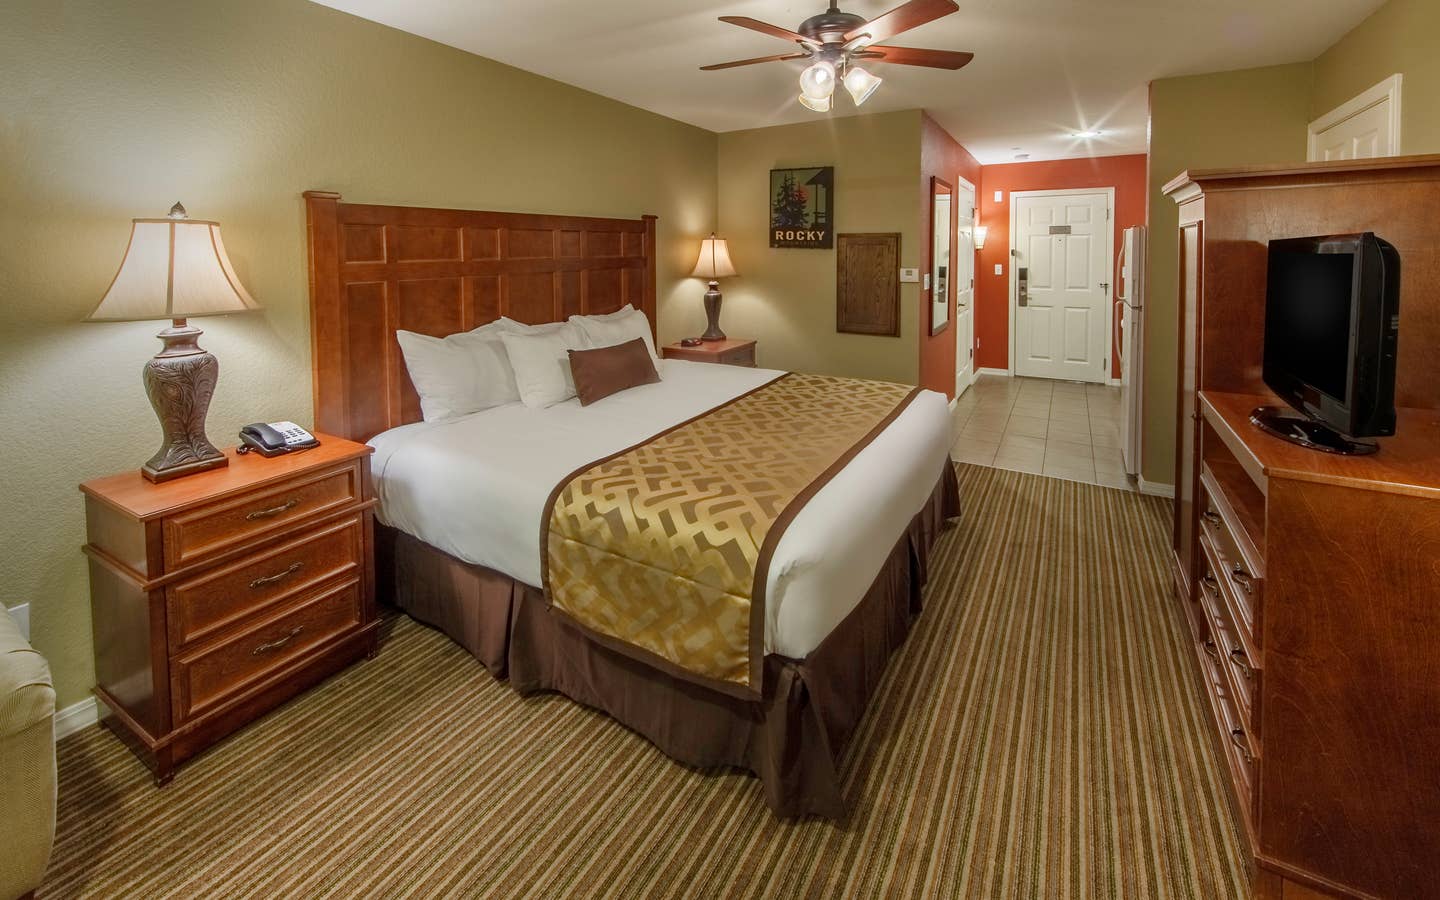 King bed and flat screen TV in a studio room at Piney Shores Resort in Conroe, Texas